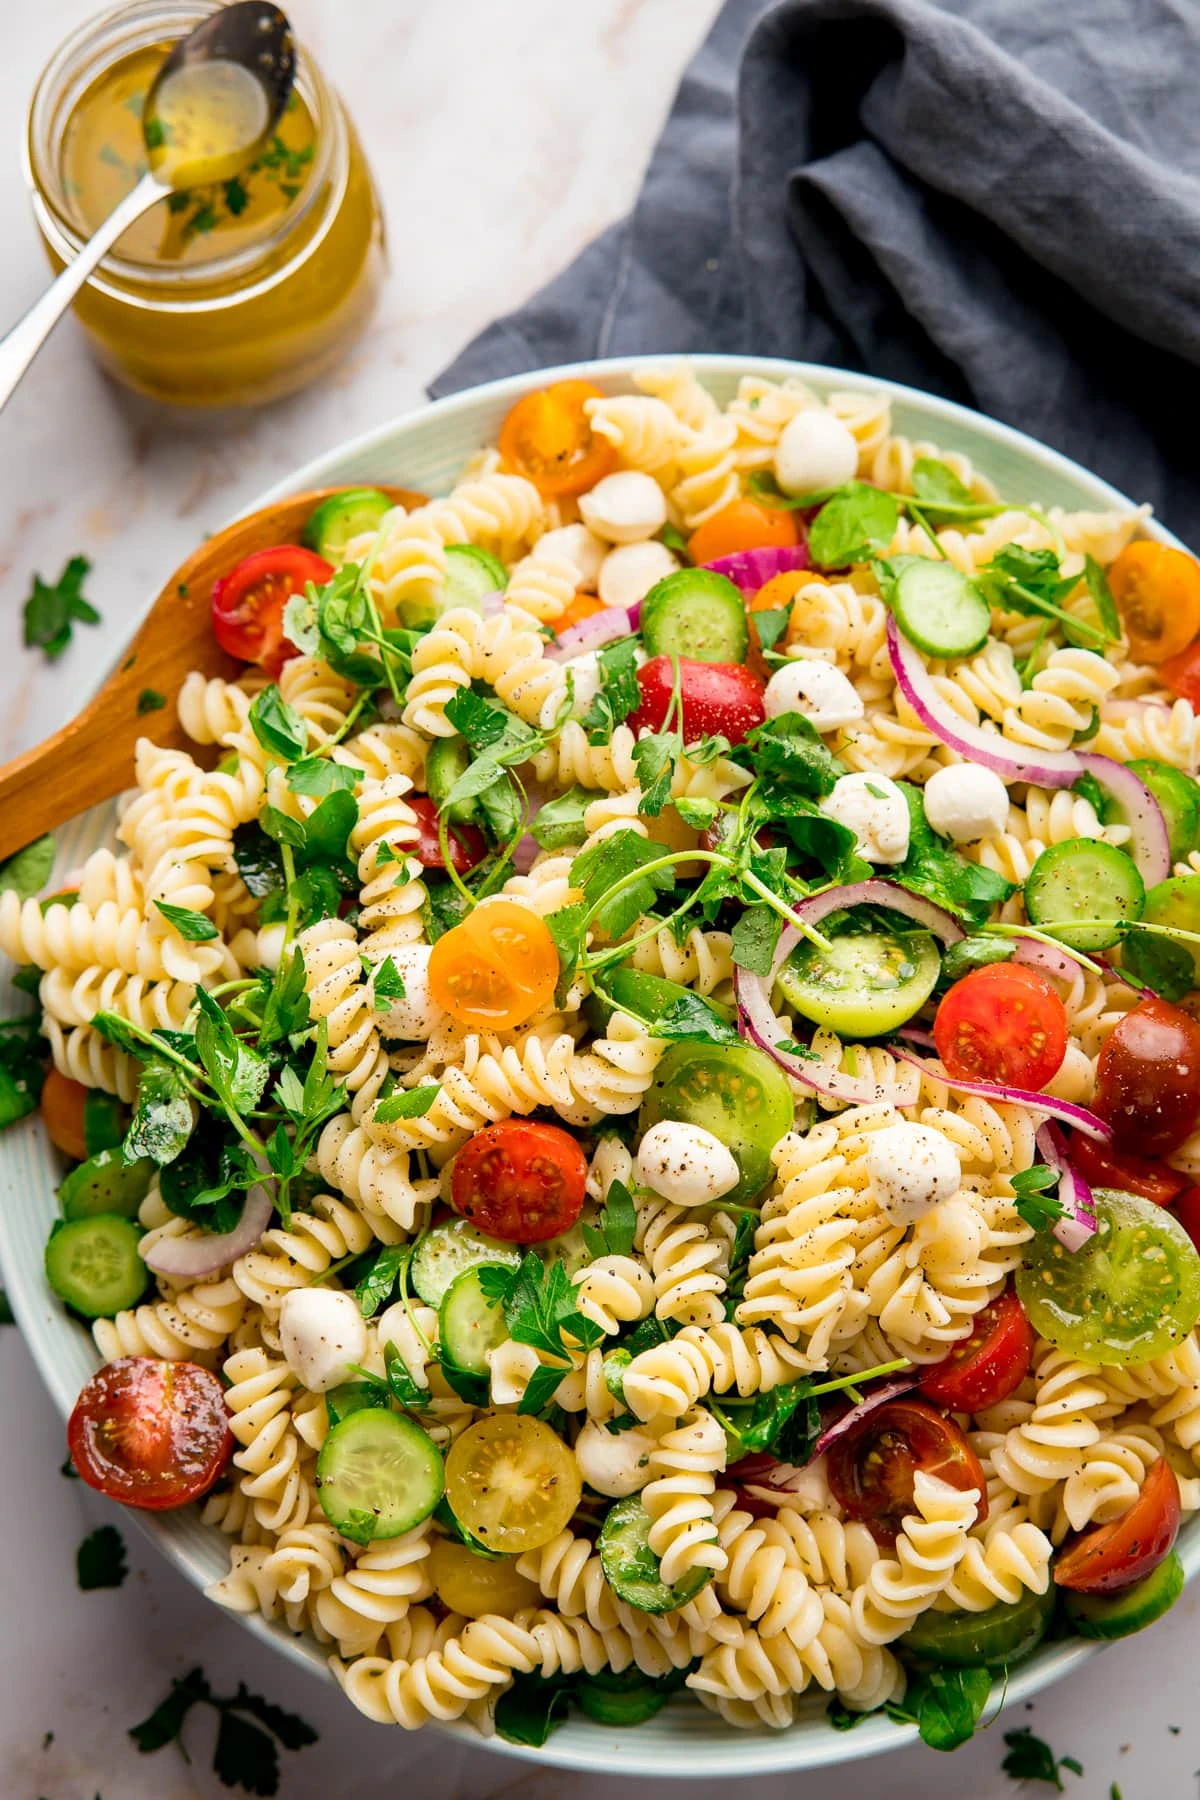 Large bowl filled with pasta salad